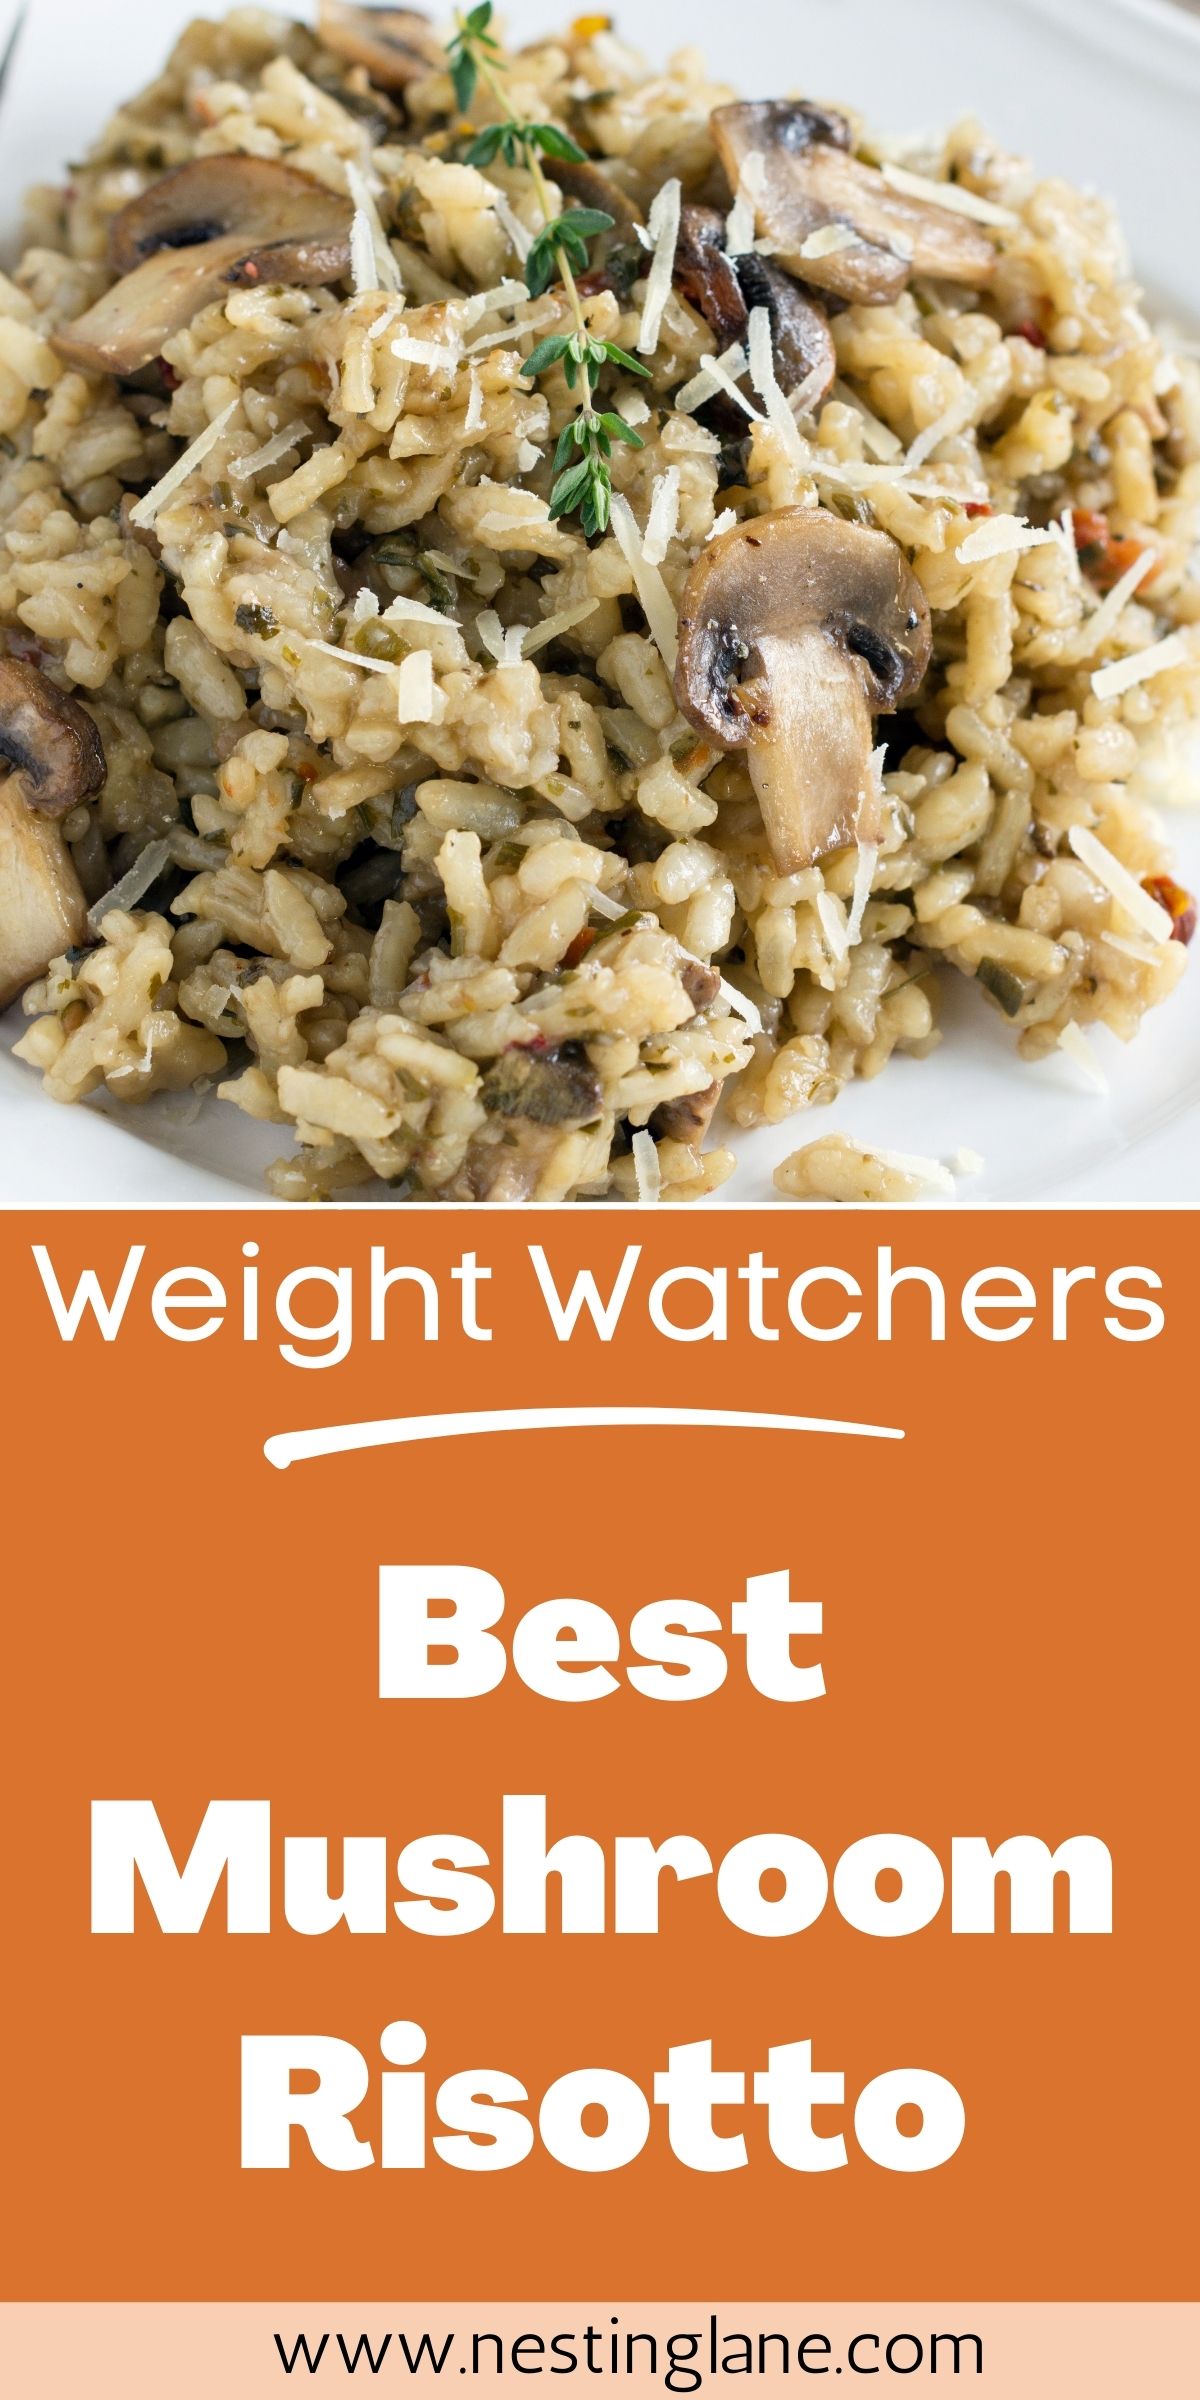 Graphic for Pinterest of Best Weight Watchers Mushroom Risotto Recipe.